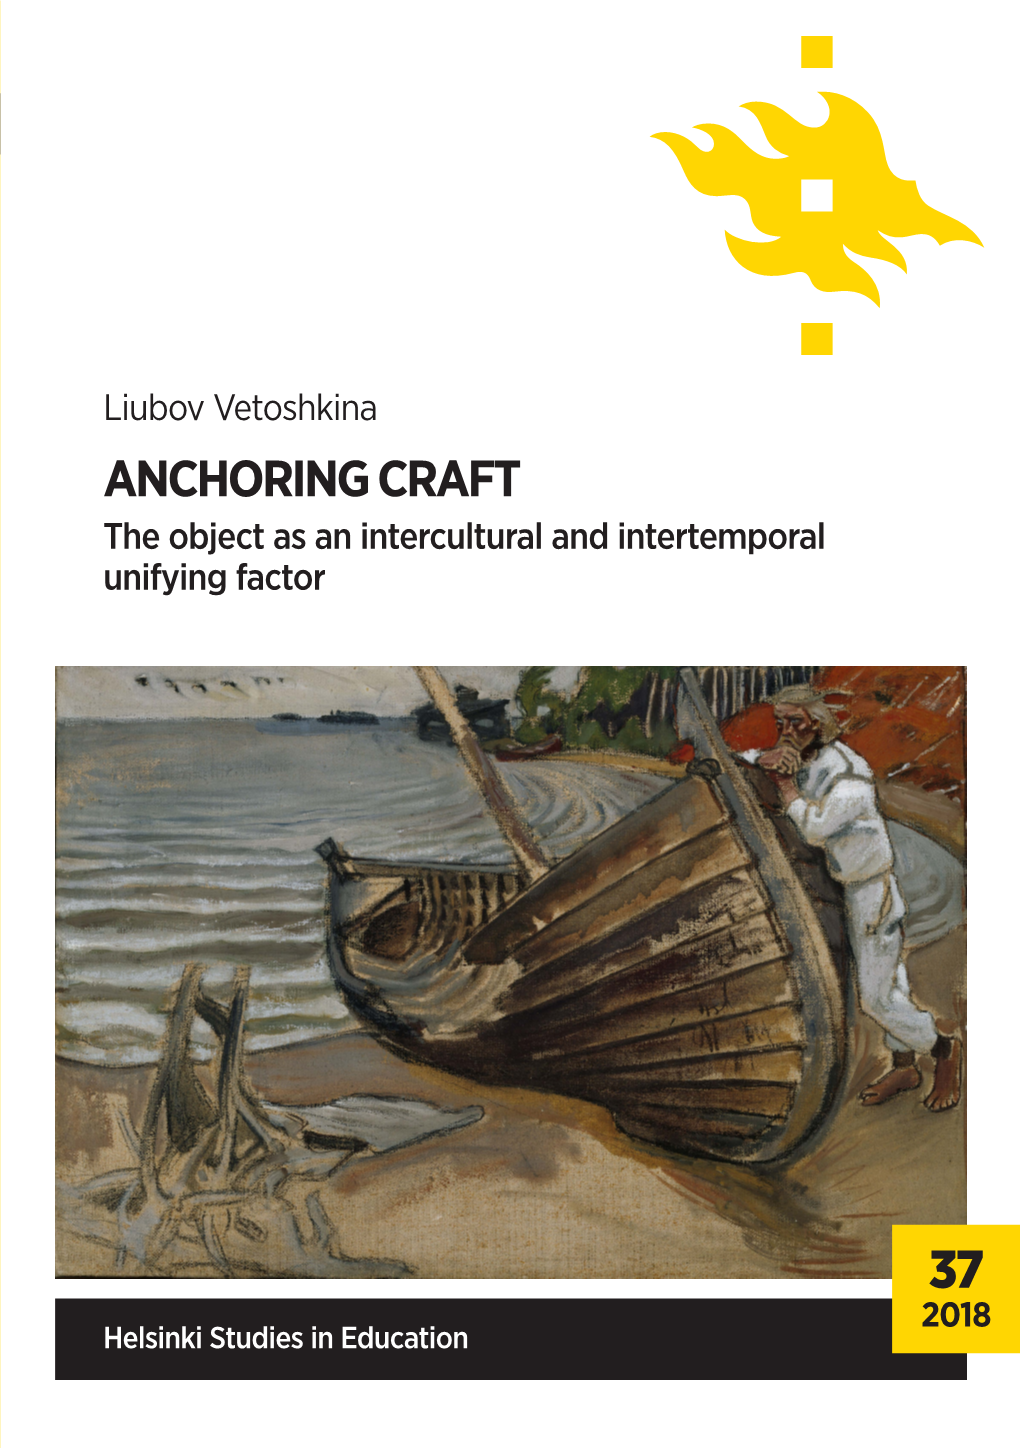 ANCHORING CRAFT the Object As an Intercultural and Intertemporal Unifying Factor